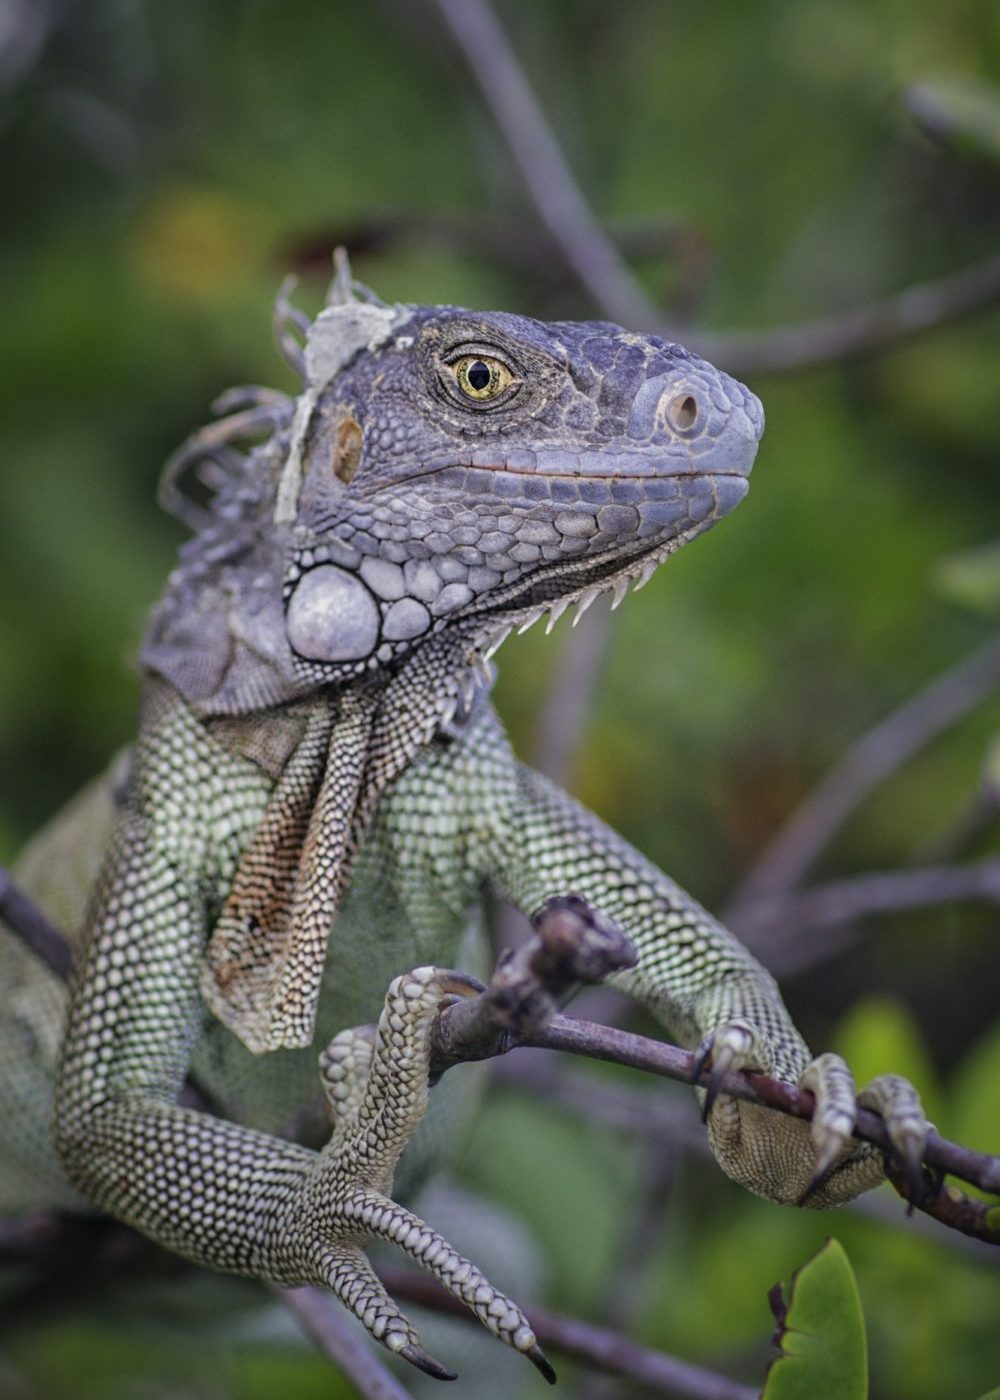 Iguana on branch looking at camera smiling, St. Croix, US Virgin Islands